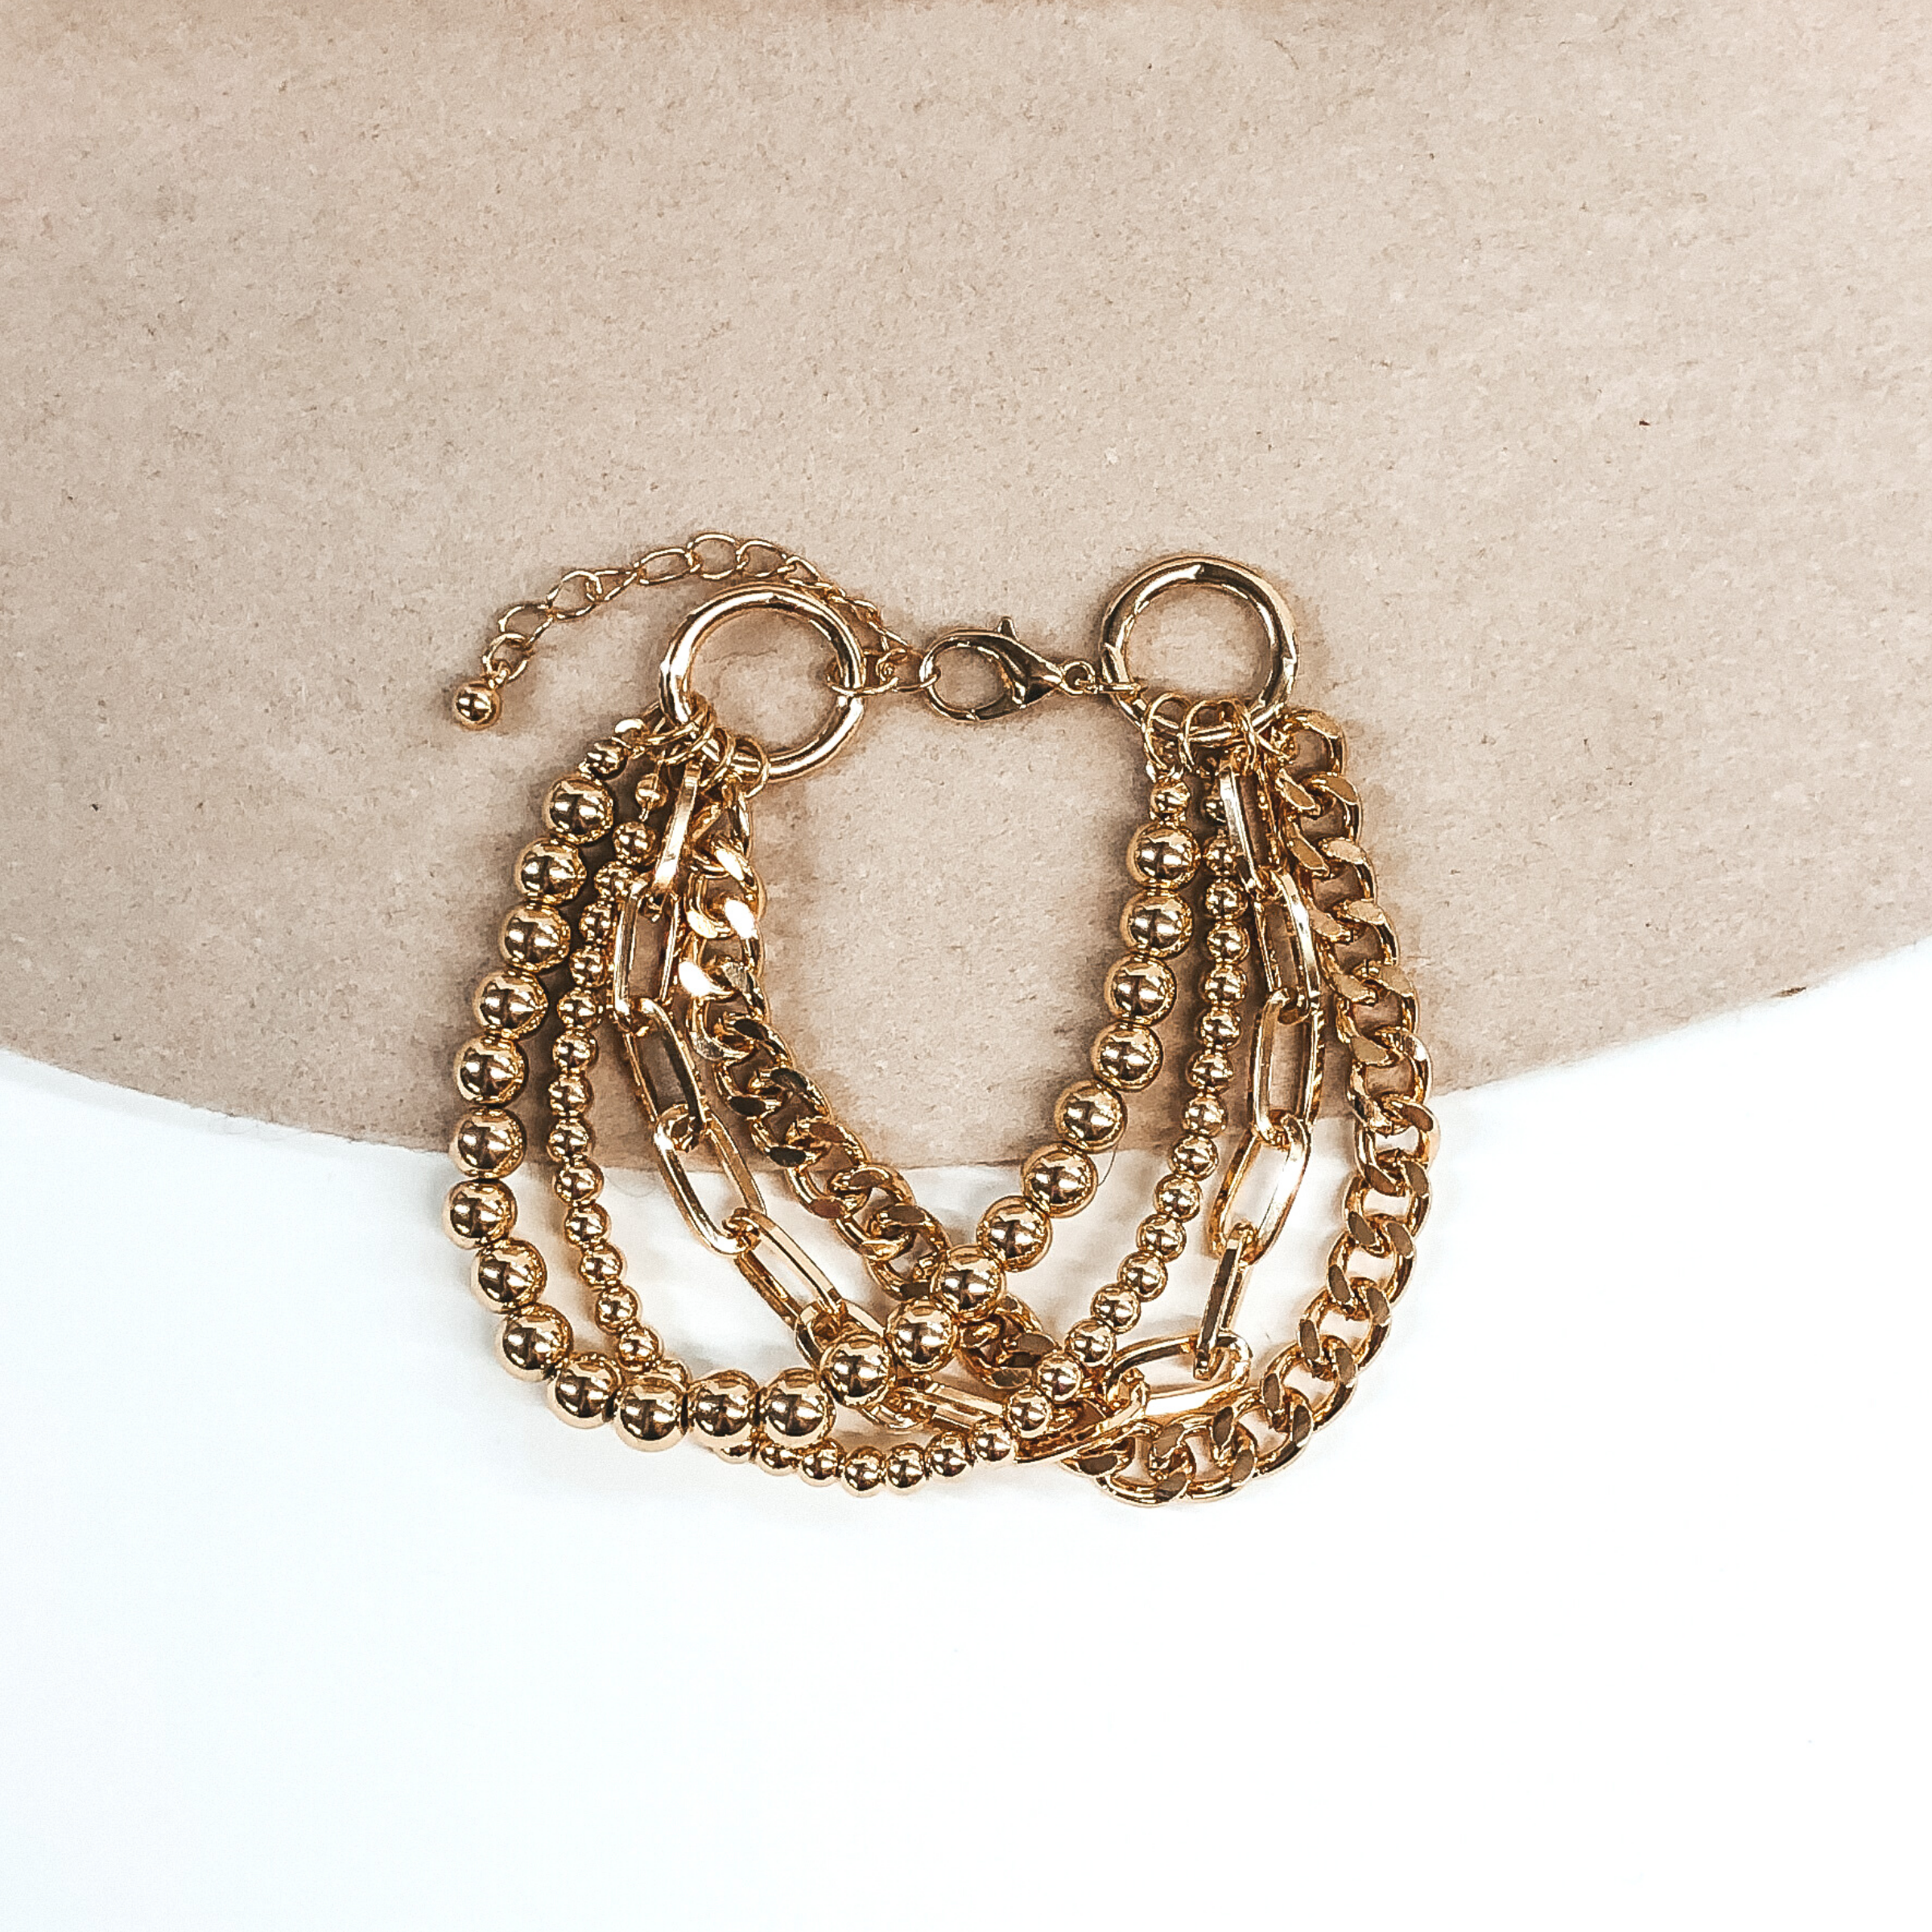 This is a gold adjustable bracelet. This bracelet includes a small and big beaded bracelet, a curb chain, and a paperclip chain. This bracelet is pictured on a beige and white background.